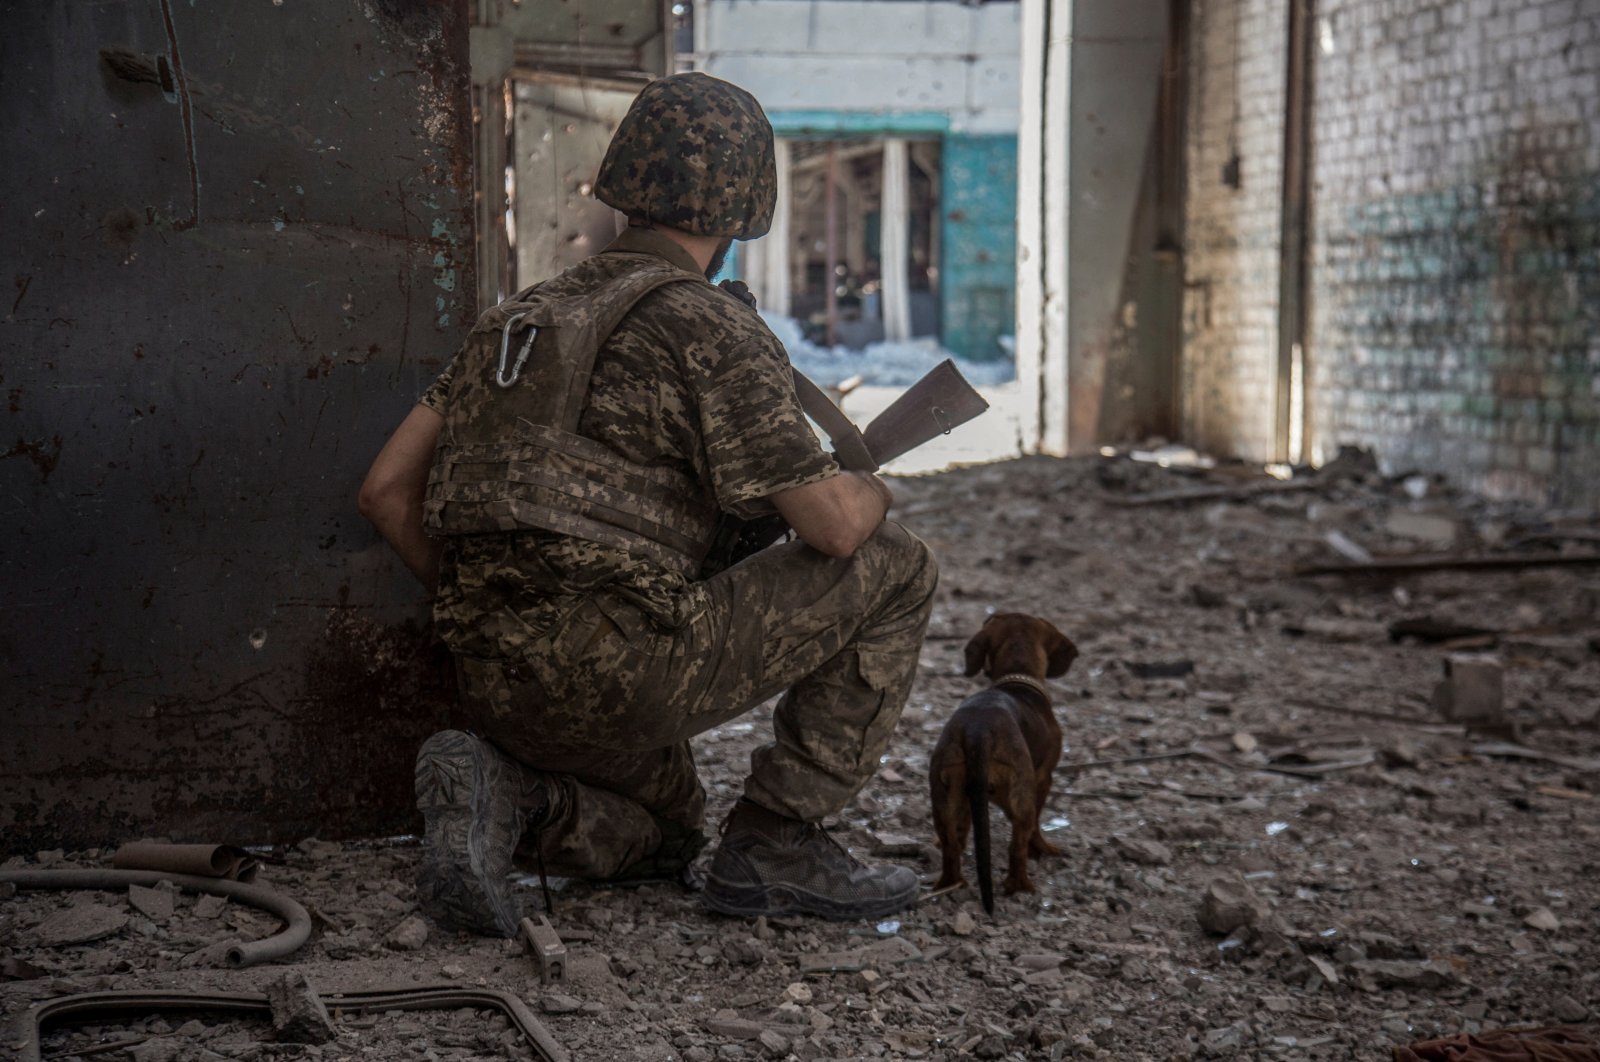 A Ukrainian service member with a dog observes in the industrial area of the city of Severodonetsk, Ukraine, June 20, 2022. (Reuters Photo)